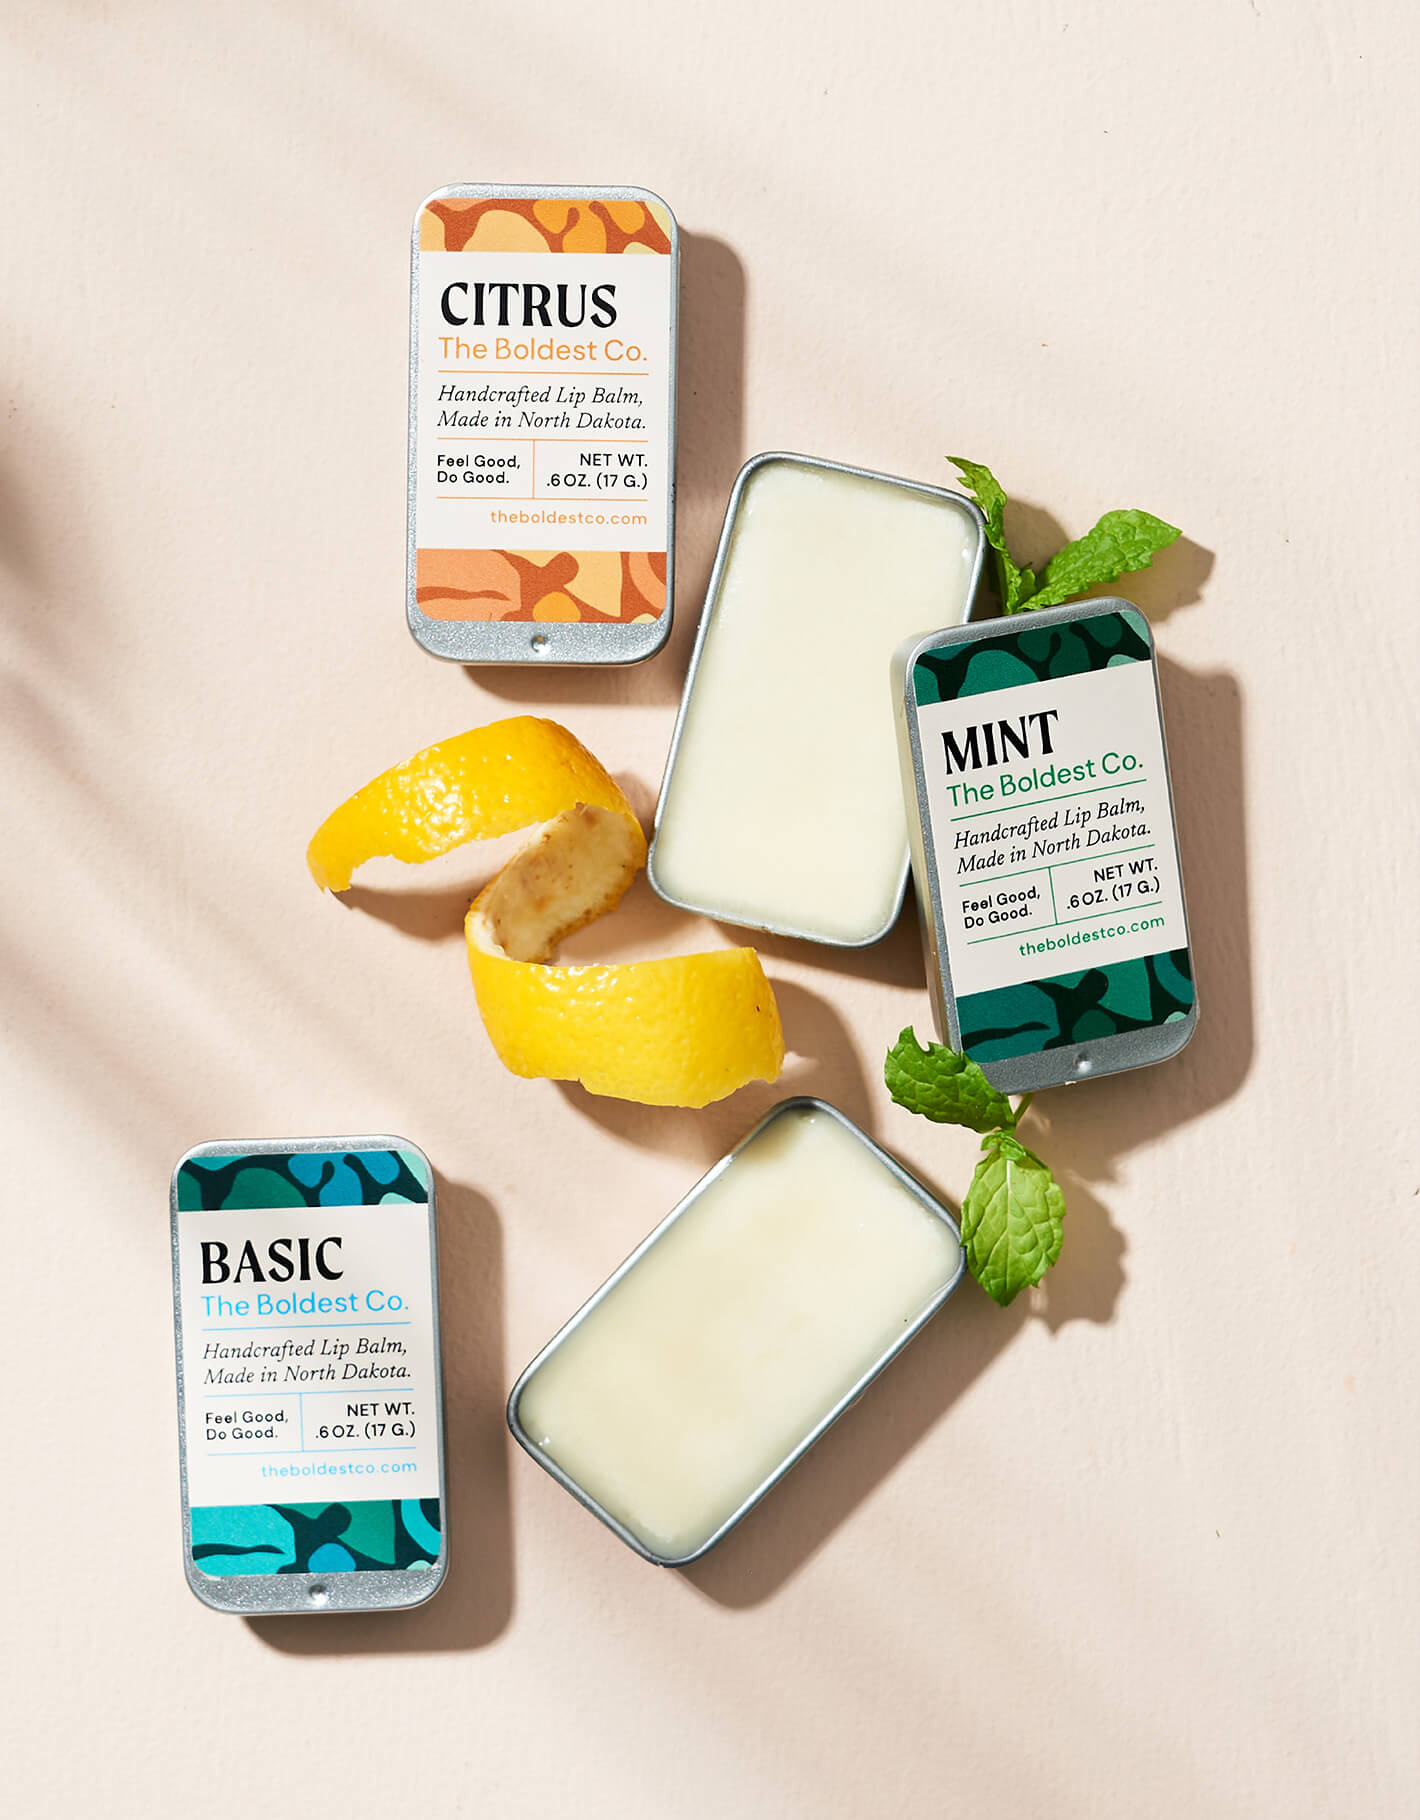 Brand design portfolio styled image of The Boldest Co’s lip-balms. The tin packaging features bright colours and mid-century inspired design and are surrounded by decorative lemon and mint garnishes.